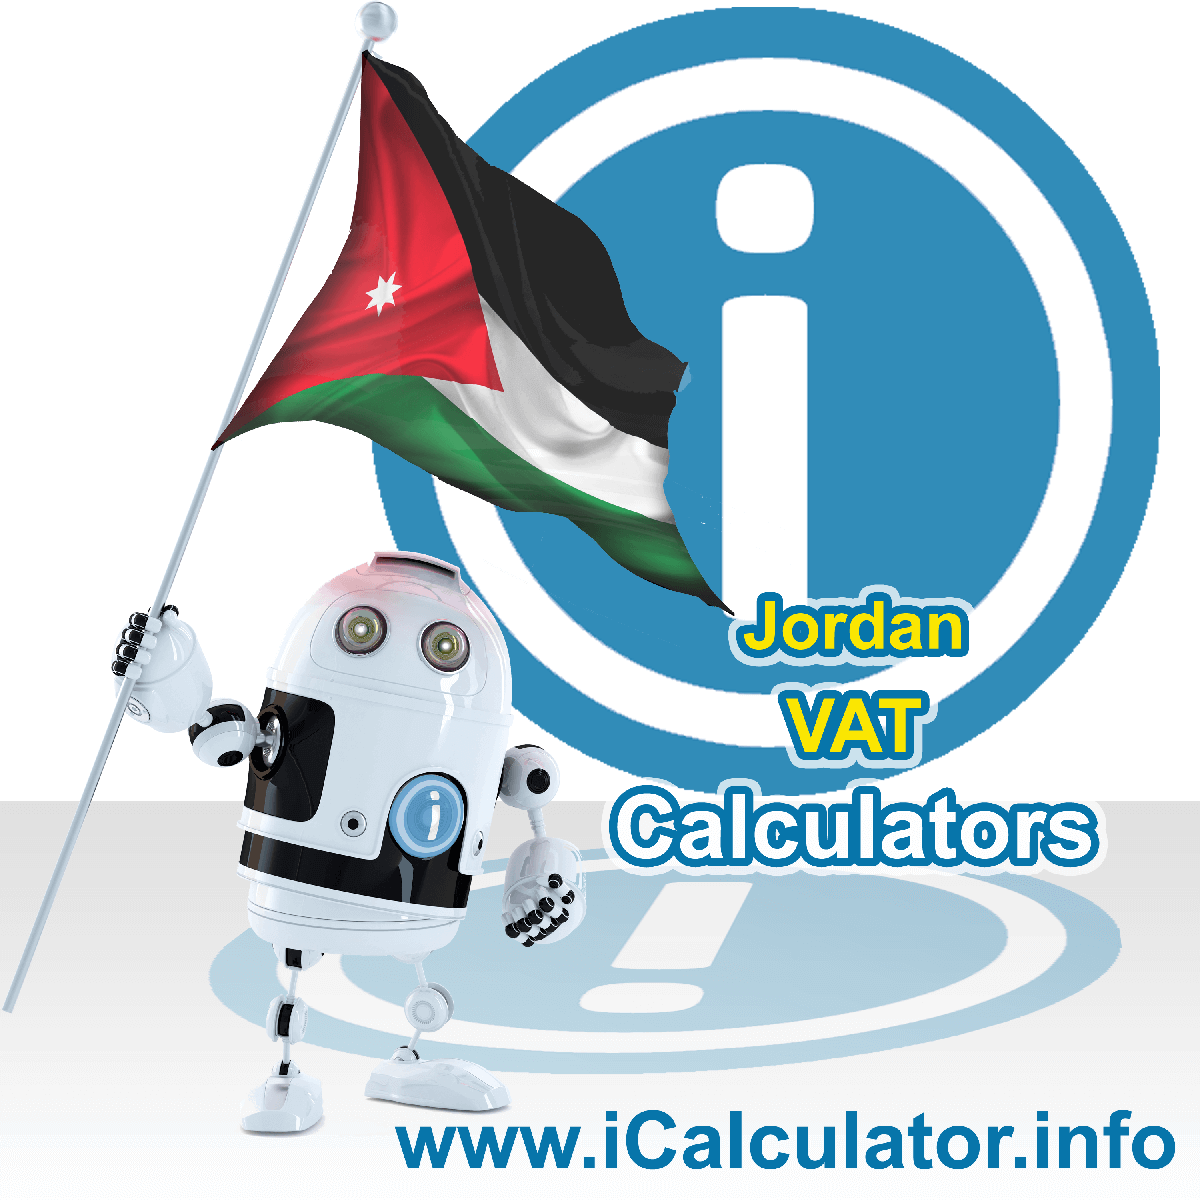 Jordan VAT Calculator. This image shows the Jordan flag and information relating to the VAT formula used for calculating Value Added Tax in Jordan using the Jordan VAT Calculator in 2023